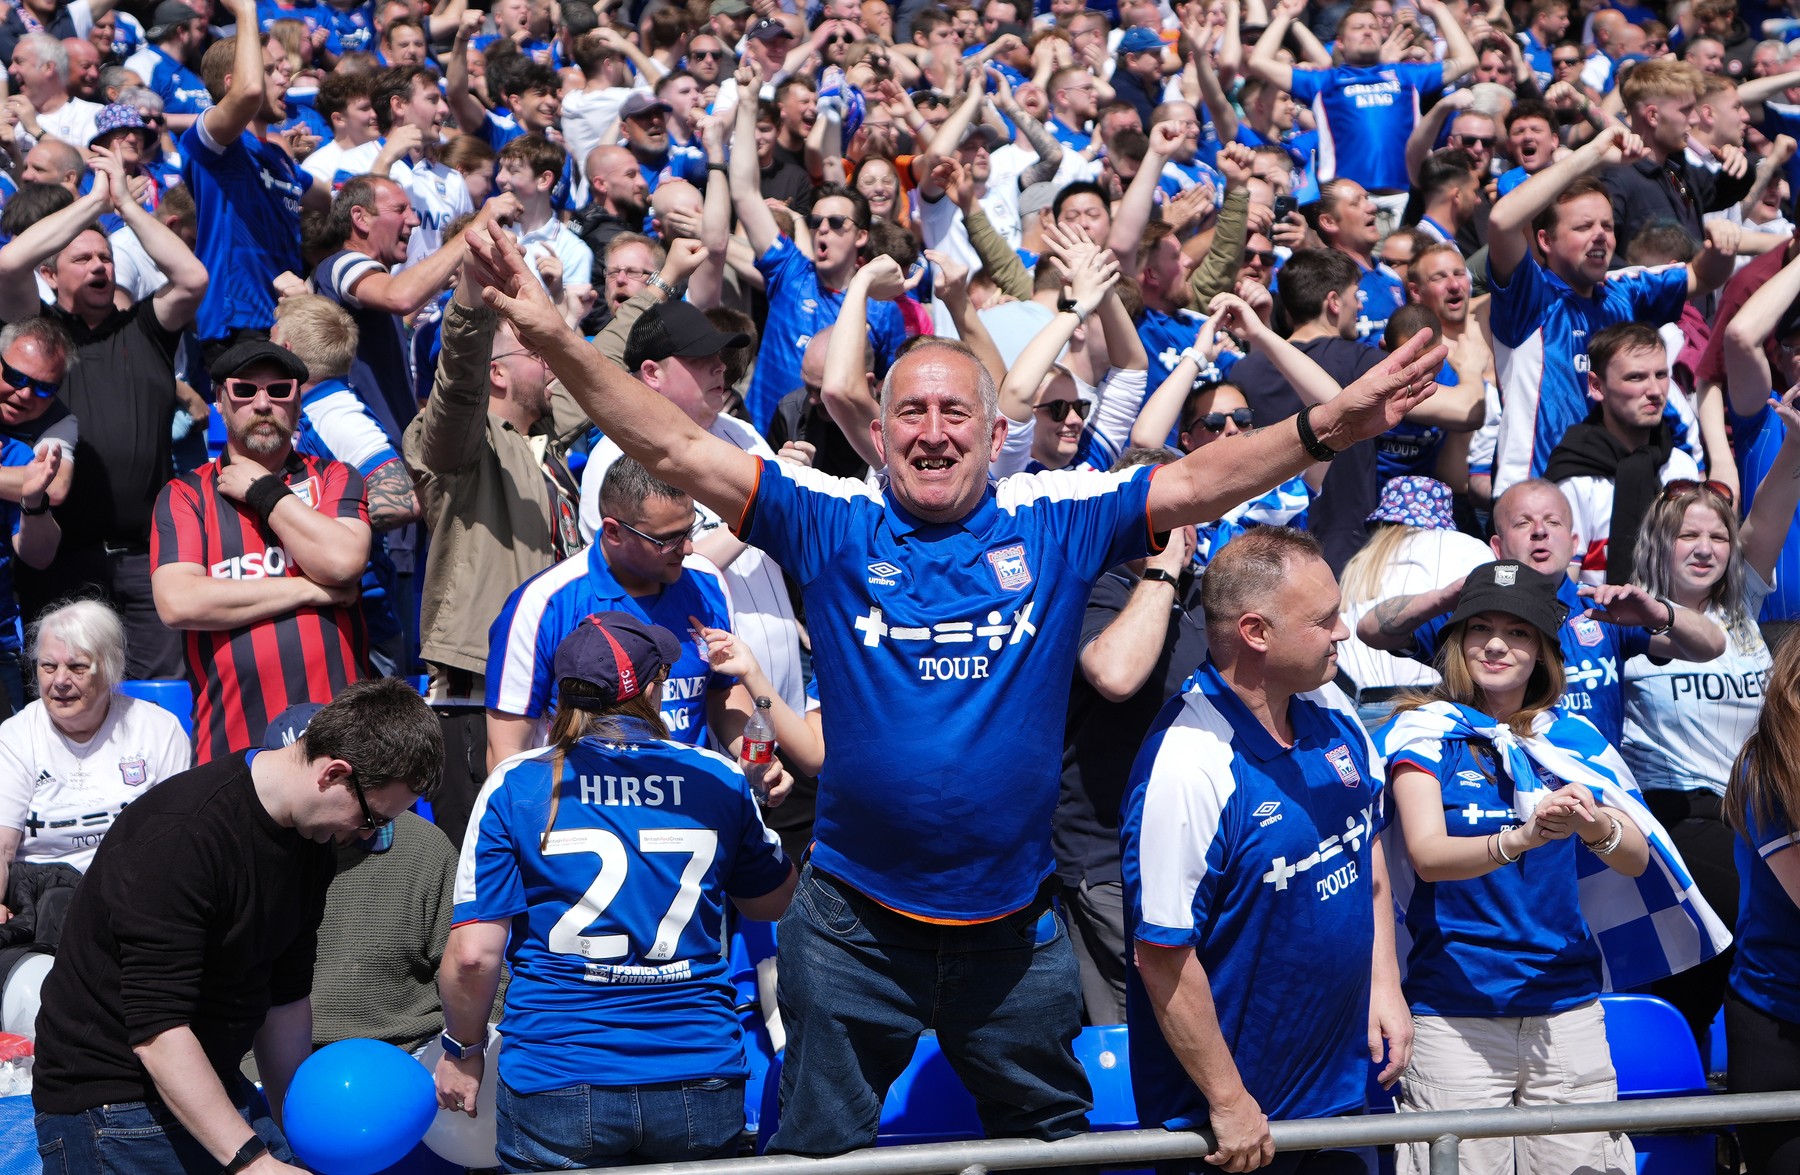 Ipswich Town supporters after their sides first goal during the Sky Bet Championship match at Portman Road, Ipswich. Picture date: Saturday May 4, 2024.,Image: 870159423, License: Rights-managed, Restrictions: EDITORIAL USE ONLY No use with unauthorised audio, video, data, fixture lists, club/league logos or "live" services. Online in-match use limited to 120 images, no video emulation. No use in betting, games or single club/league/player publications., Model Release: no, Credit line: Zac Goodwin / PA Images / Profimedia